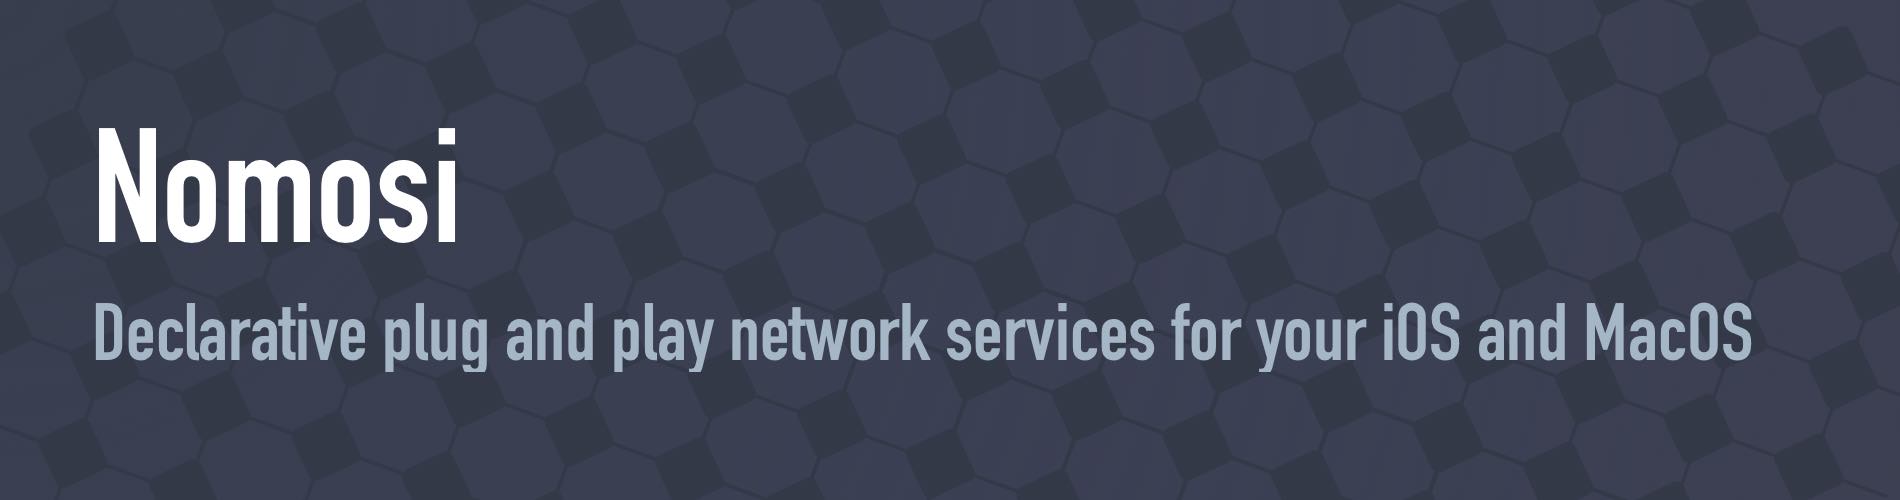 Nomosi: Declarative plug and play network services for your iOS apps